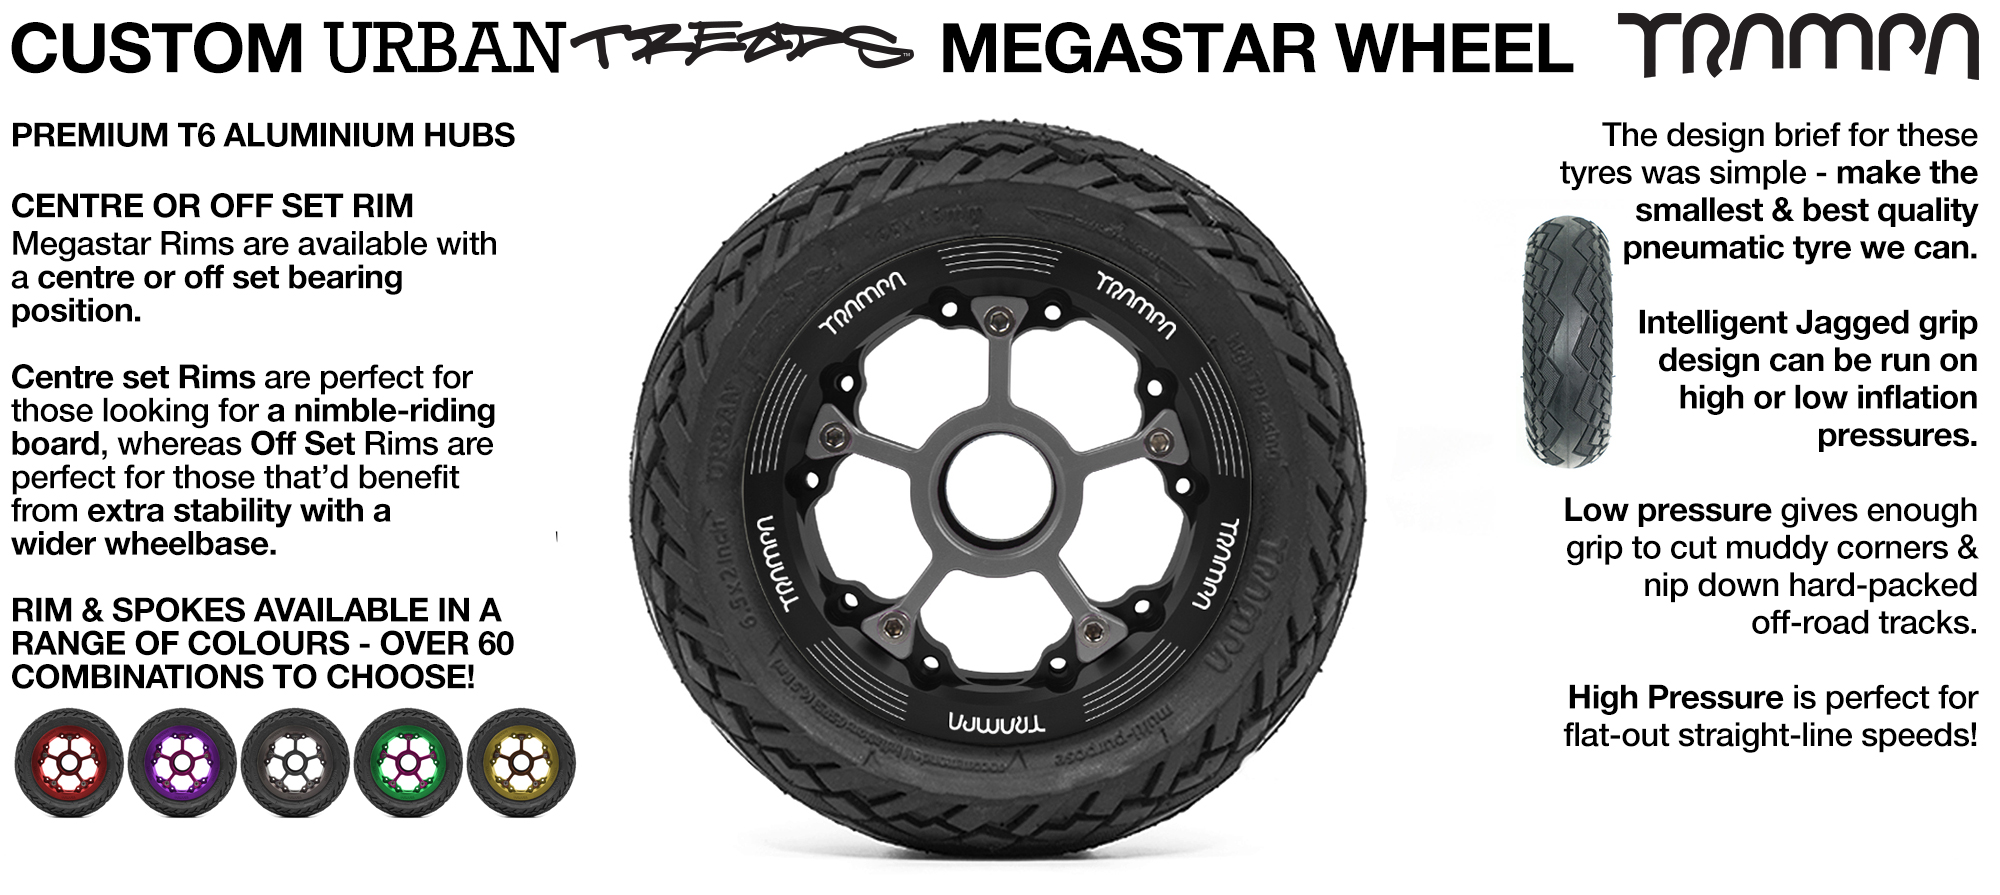 CENTER-SET MEGASTAR 8 Hub with the amazing Low Profile 6.5 Inch URBAN Treads Tyres 